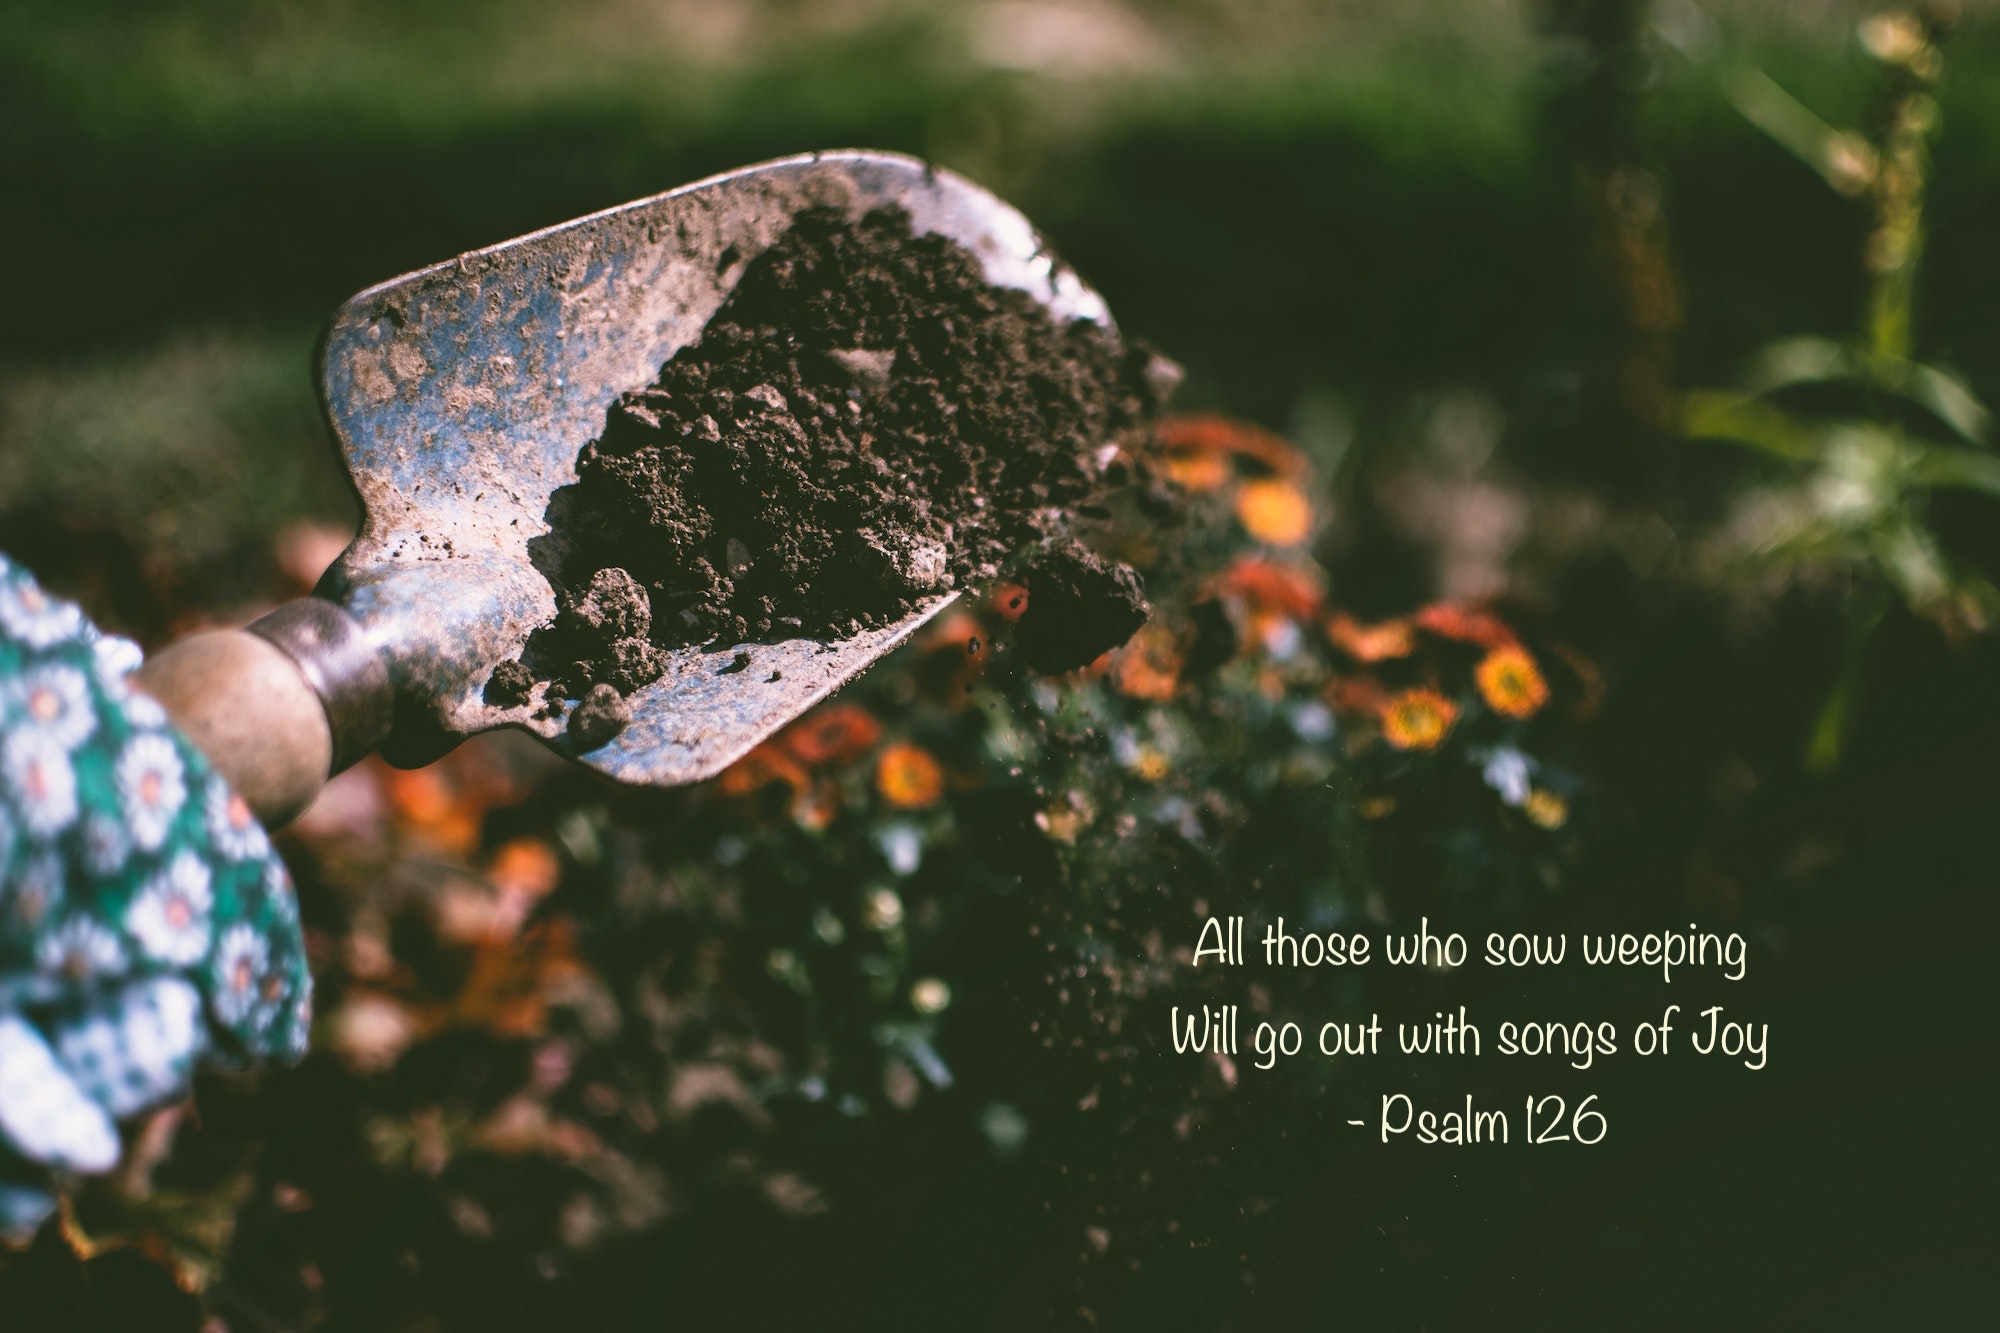 All those who sow weeping, will go out with Psalms of joy - Psalm 126